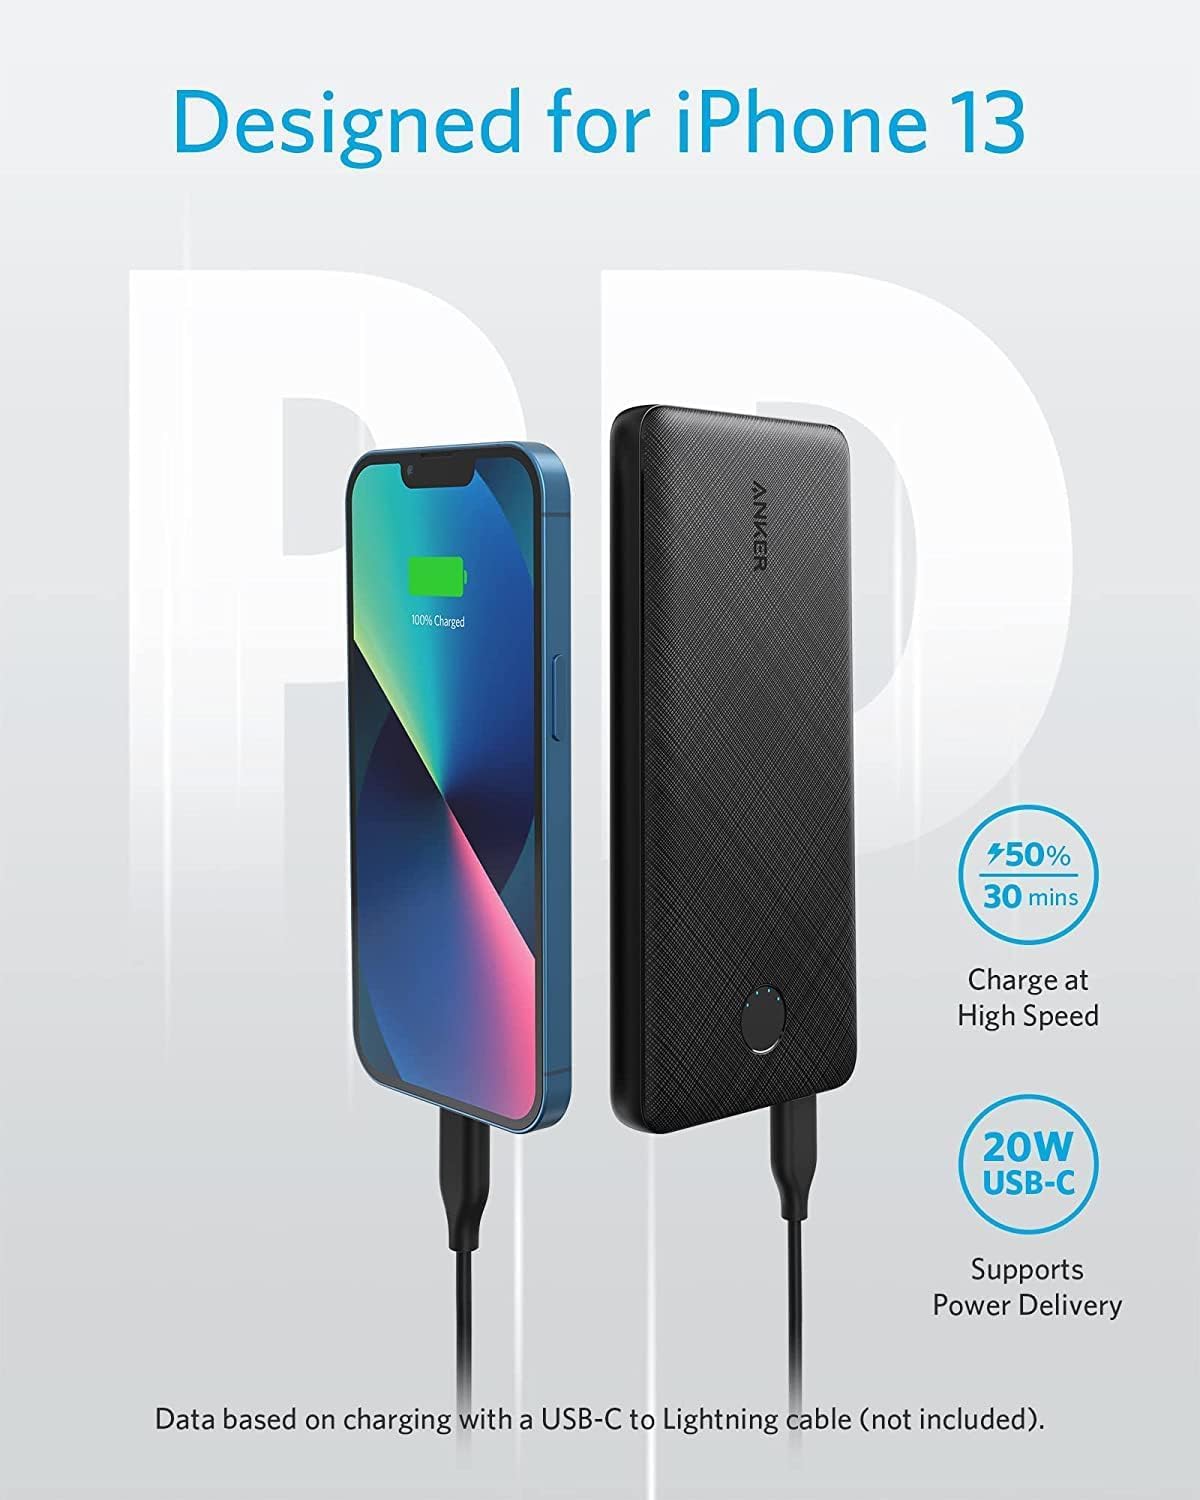 Anker Portable Charger, USB-C PortableCharger 10000mAh with 20W Power Delivery, 523 Power Bank (PowerCore Slim 10K PD) for iPhone 14/13/12 Series, S10, Pixel 4 and More (Black)